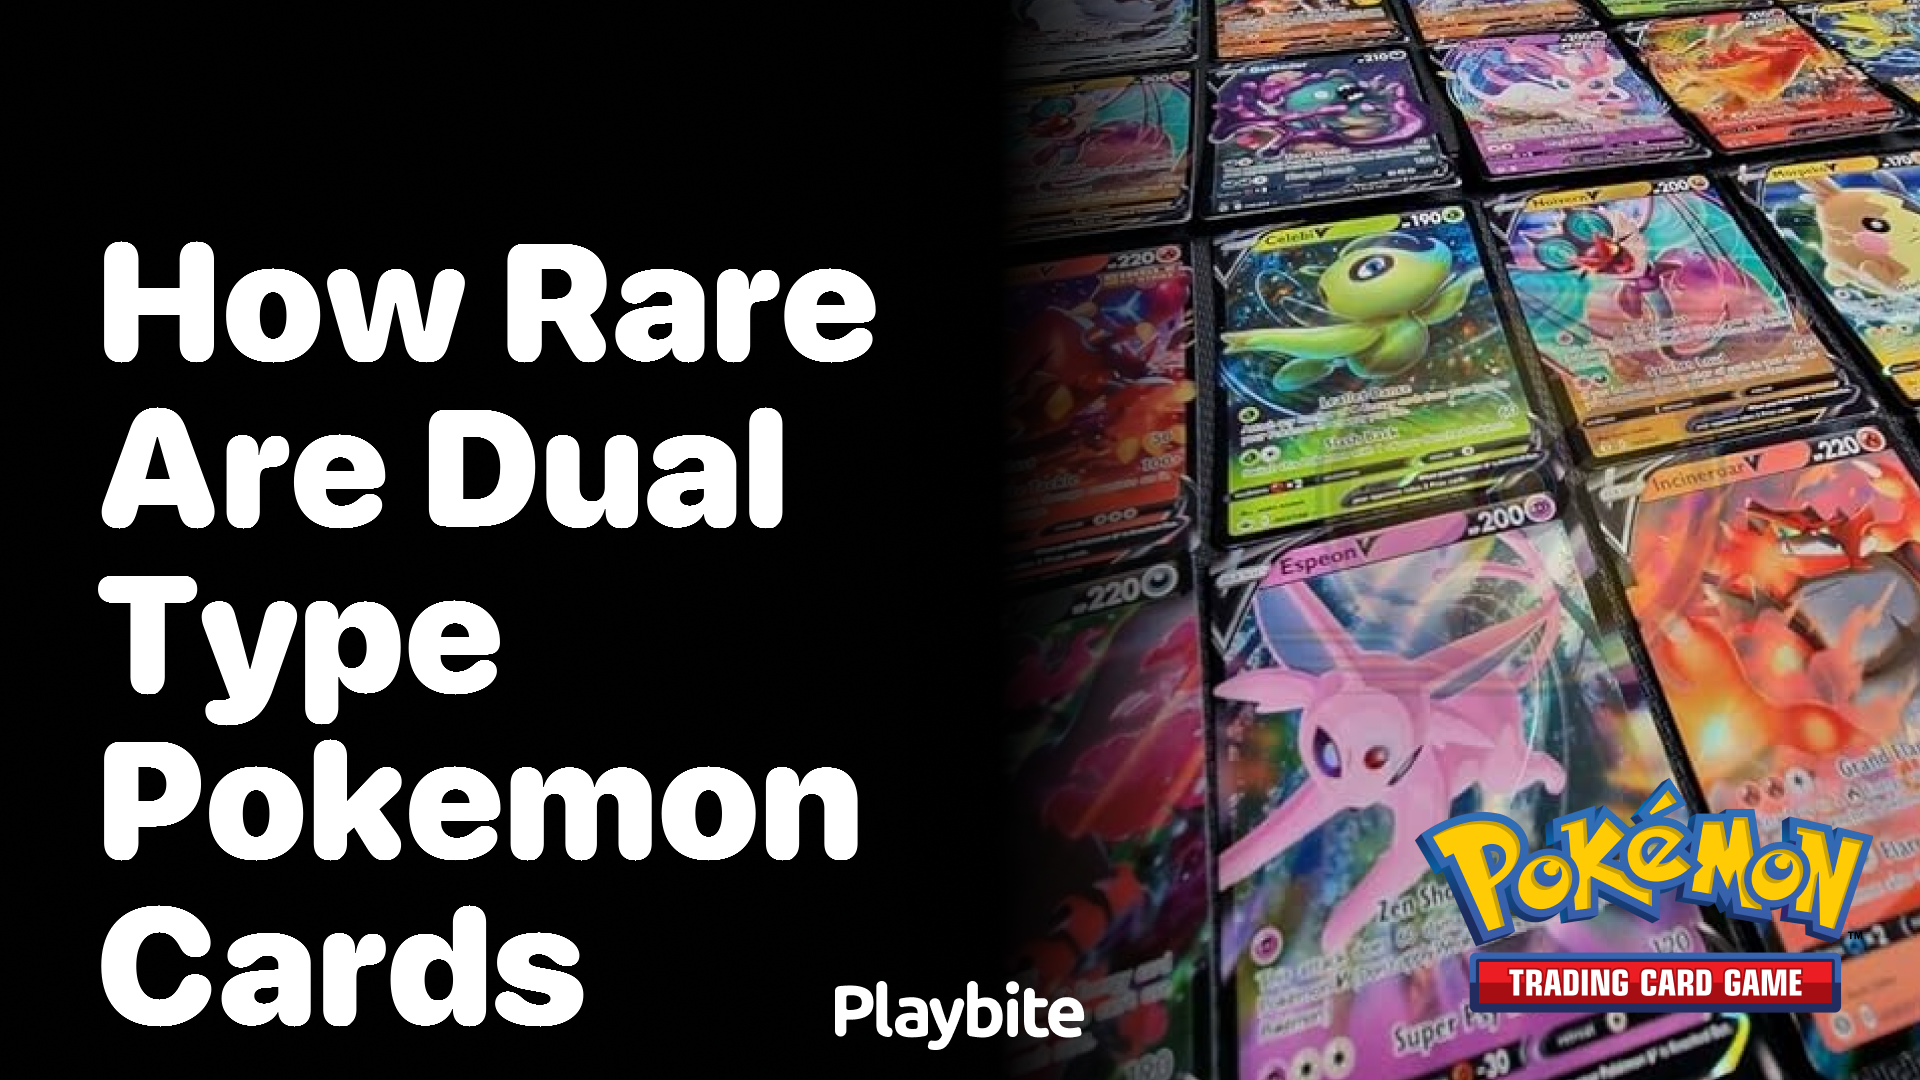 How rare are dual type Pokemon cards?